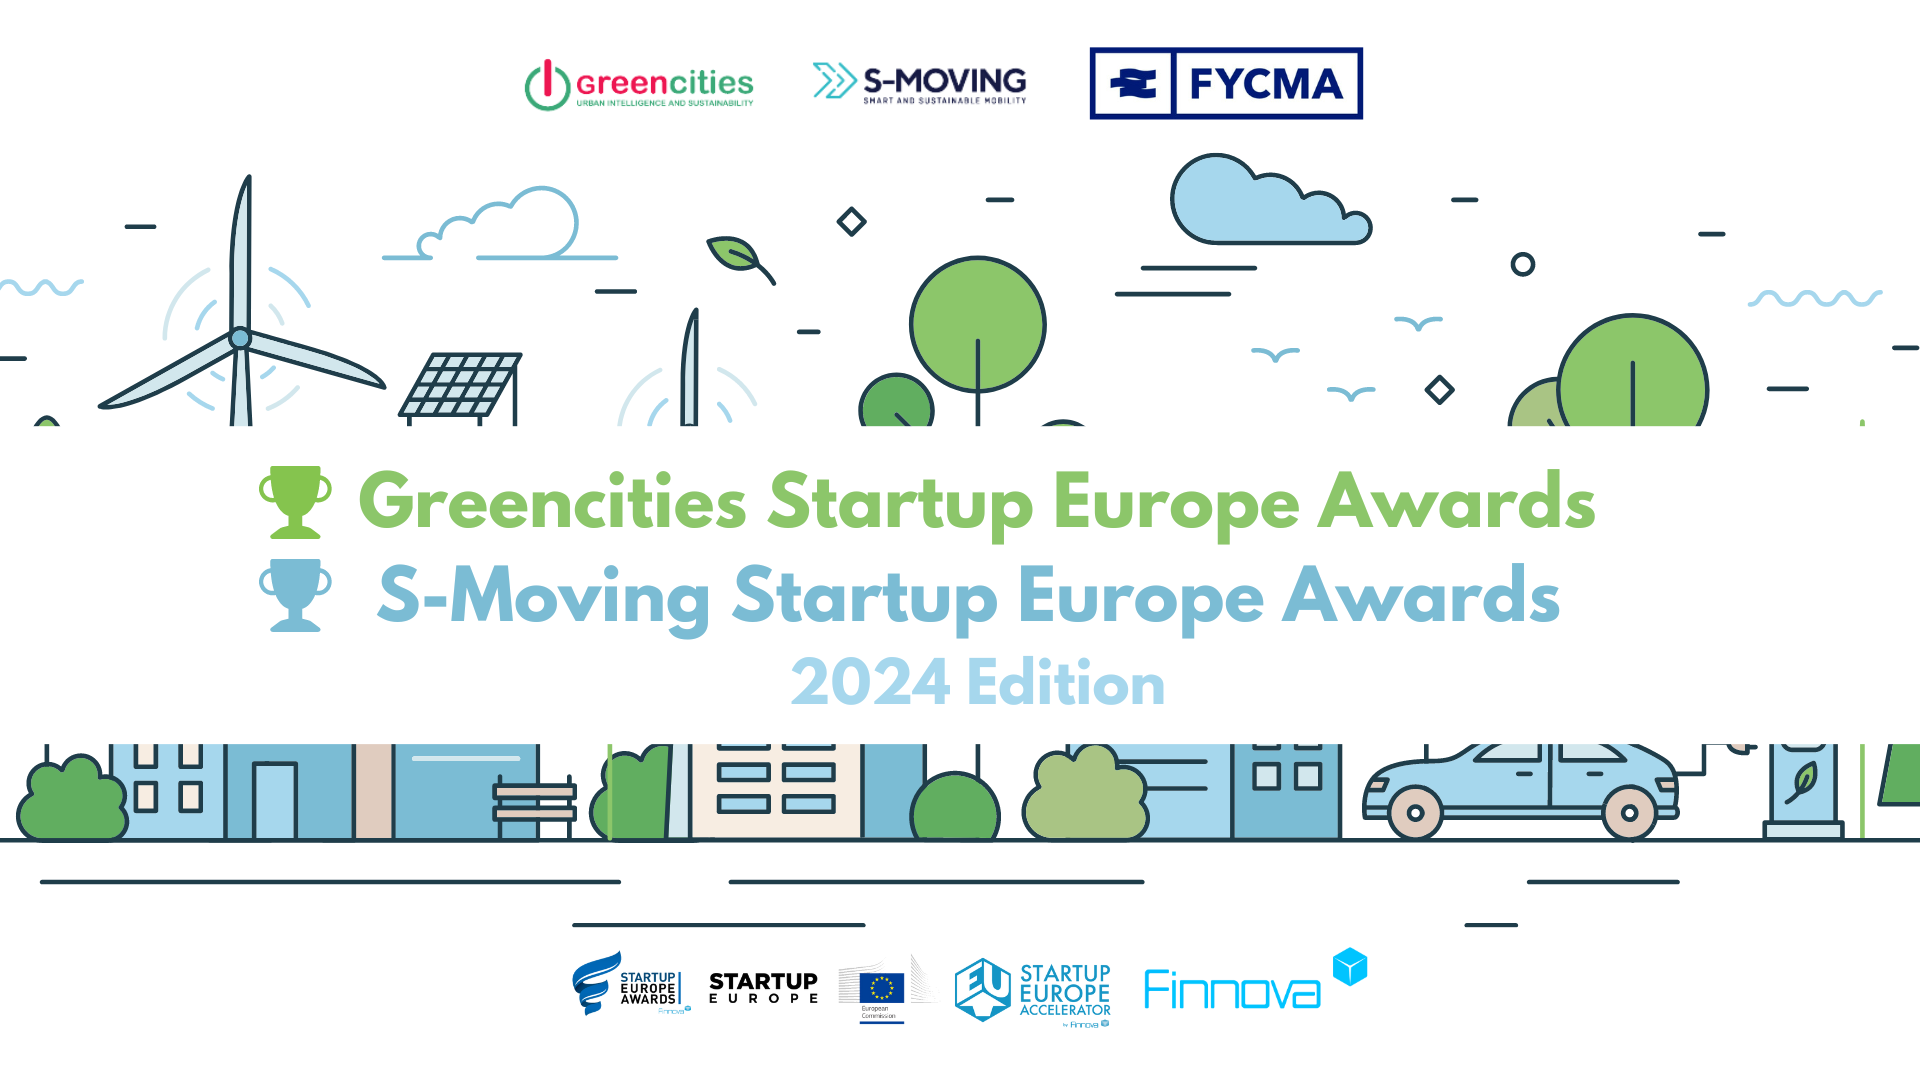 GREENCITIES & S-MOVING Startup Europe Awards: Finnova opens two new calls for entrepreneurs